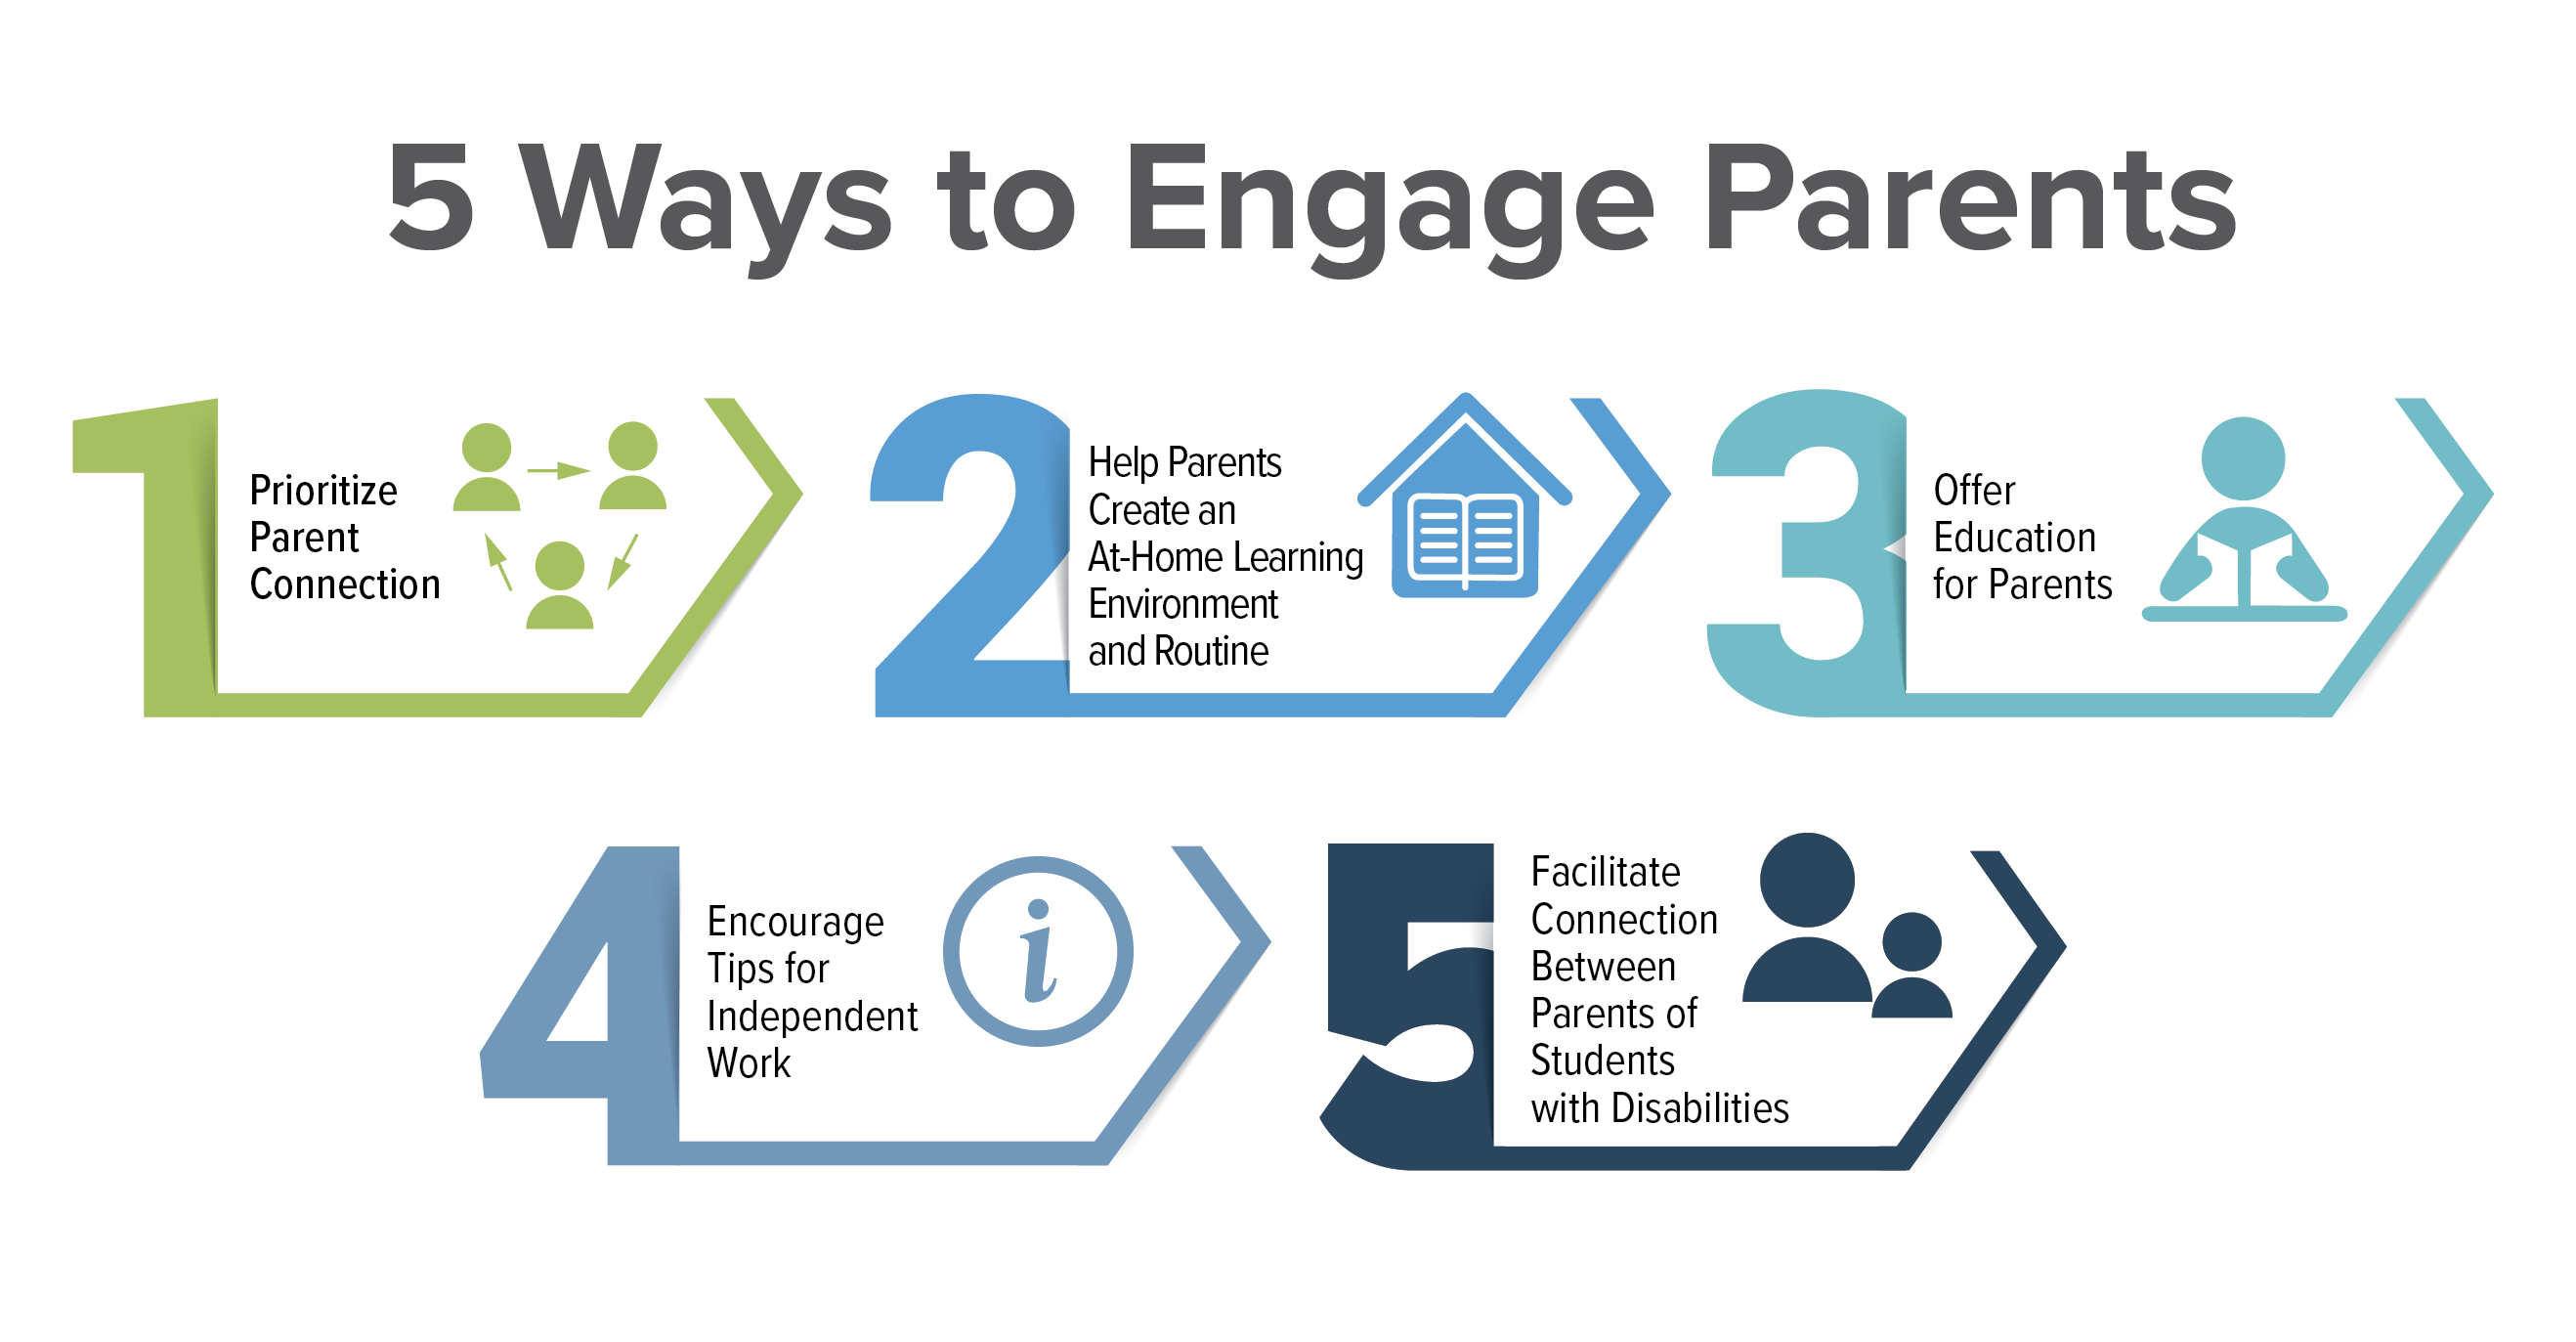 5 ways to engage Parents